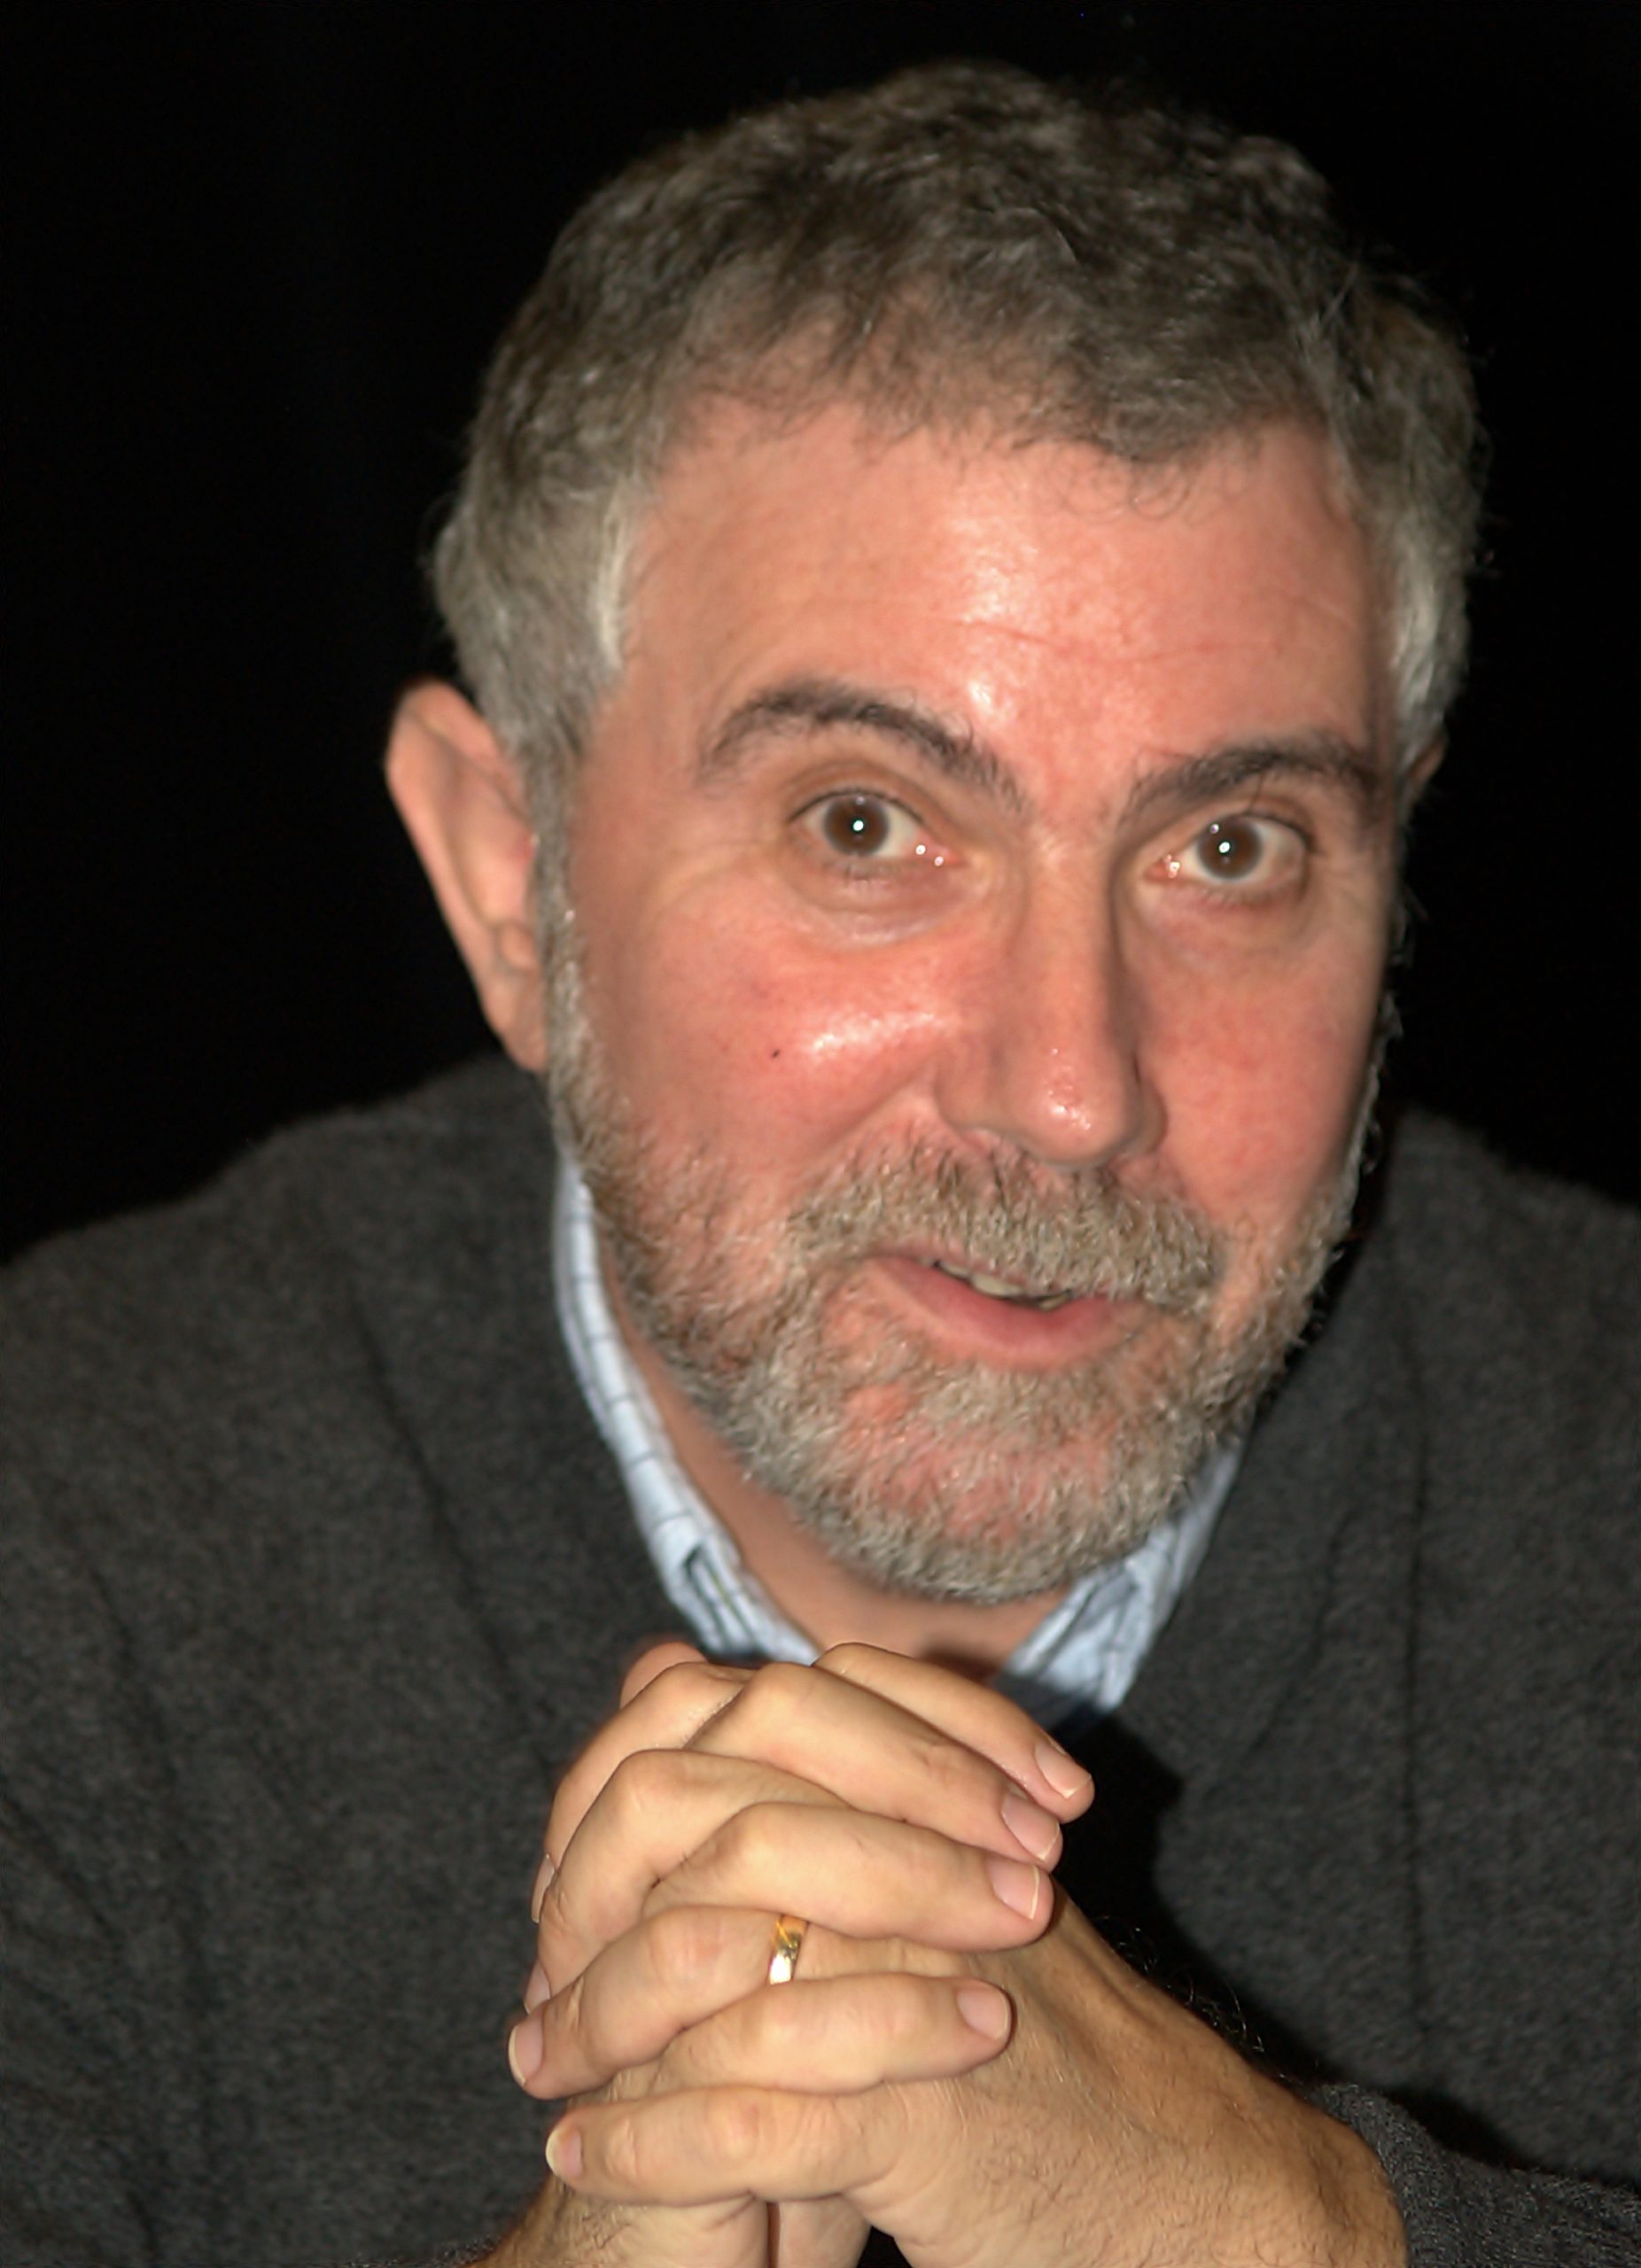  Paul Krugman and the “Ersatz” Theory of Private Currencies